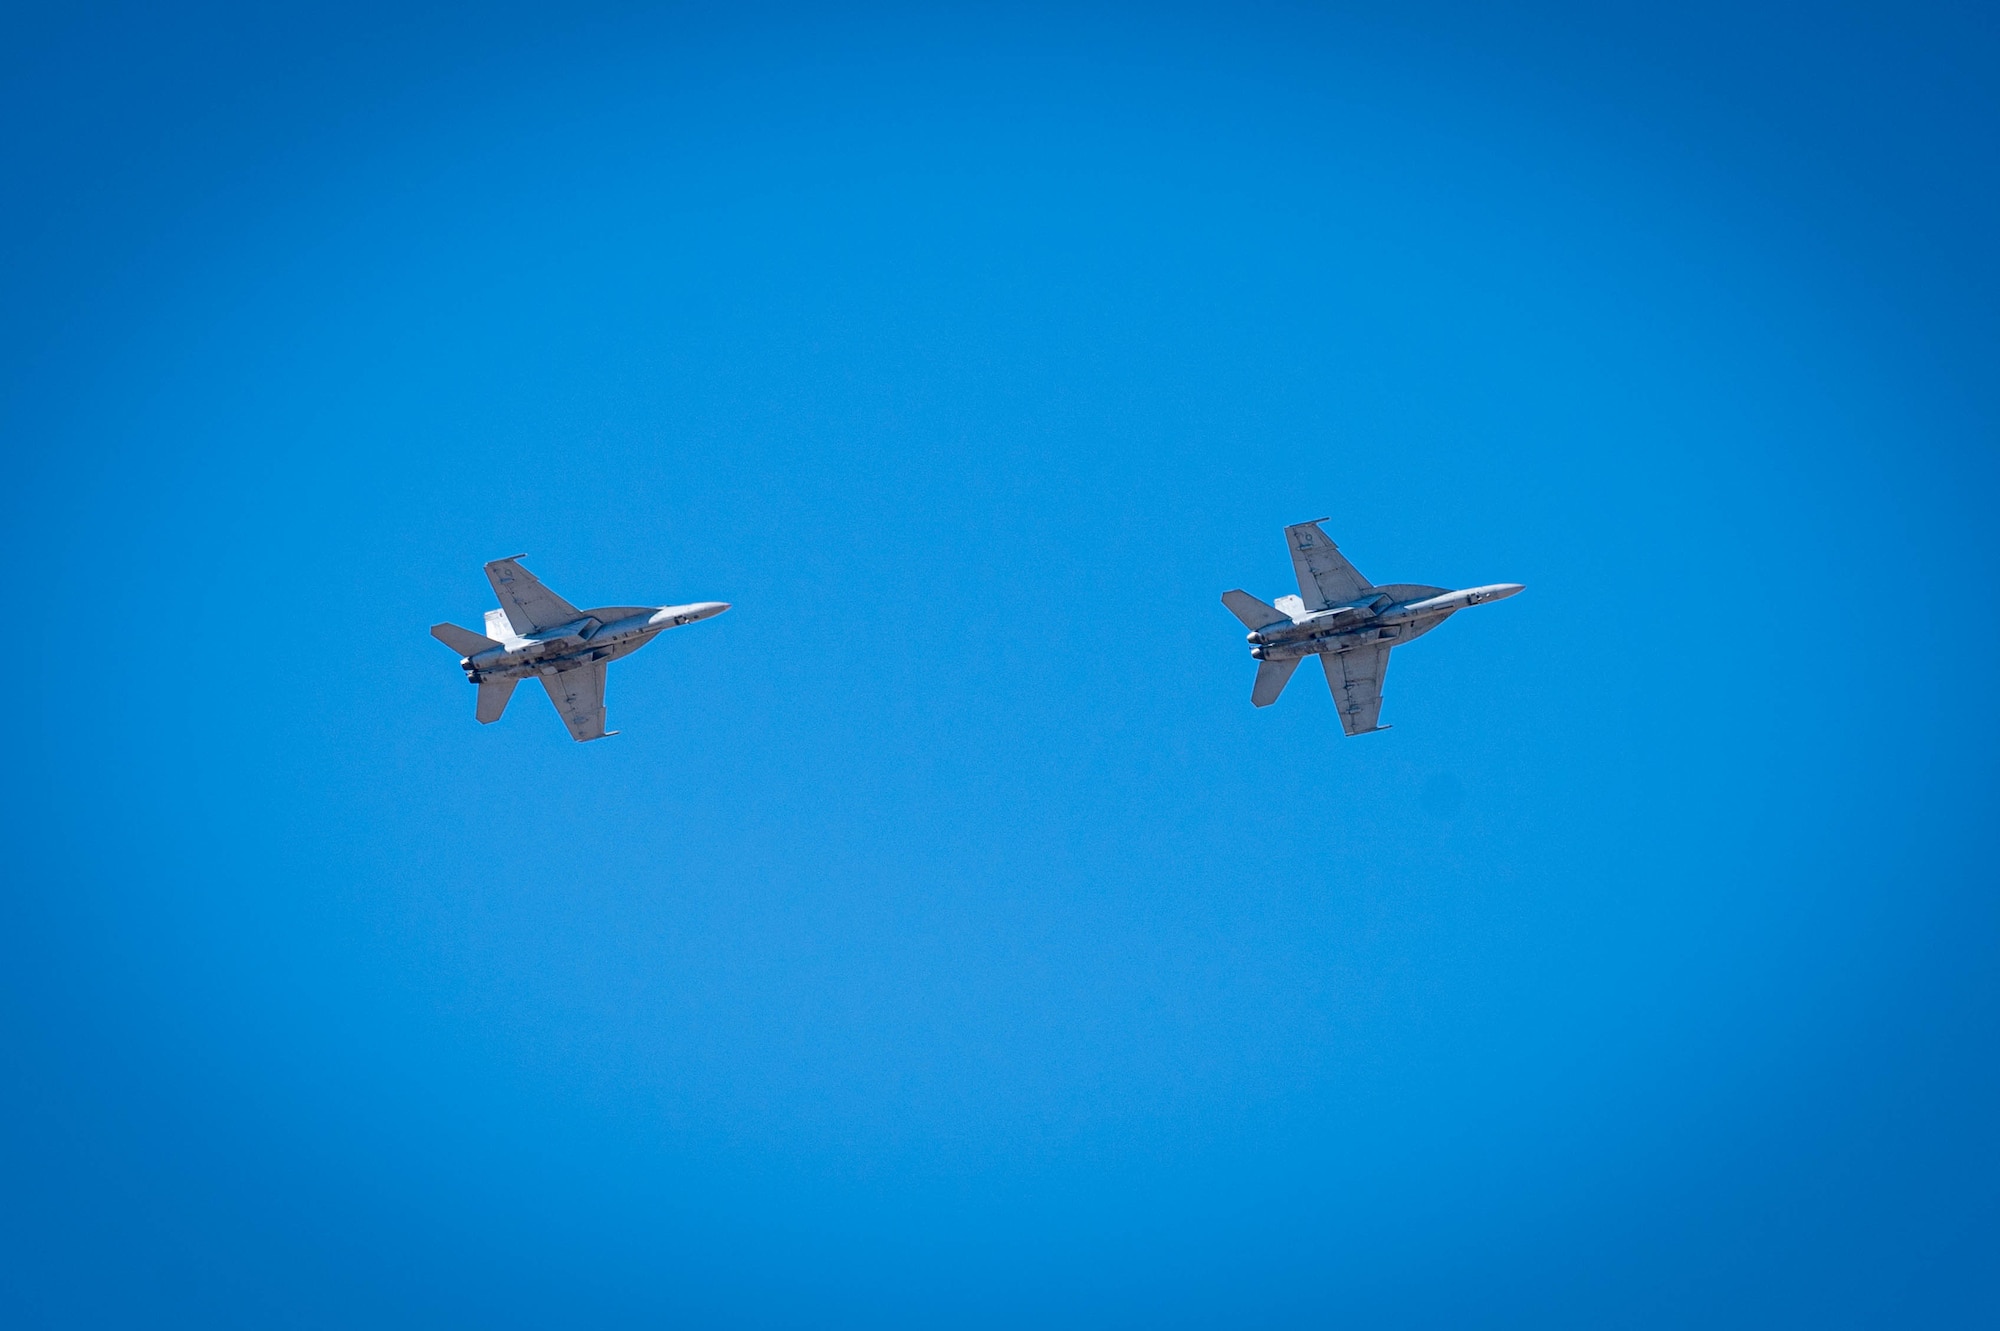 Two U.S. Navy F/A-18F Super Hornets assigned to the “Flying Eagles” Strike Fighter Squadron (VFA) 122 out of Naval Air Station (NAS) Lemoore, California, soar at Luke Air Force Base, Arizona, Feb. 7, 2023.